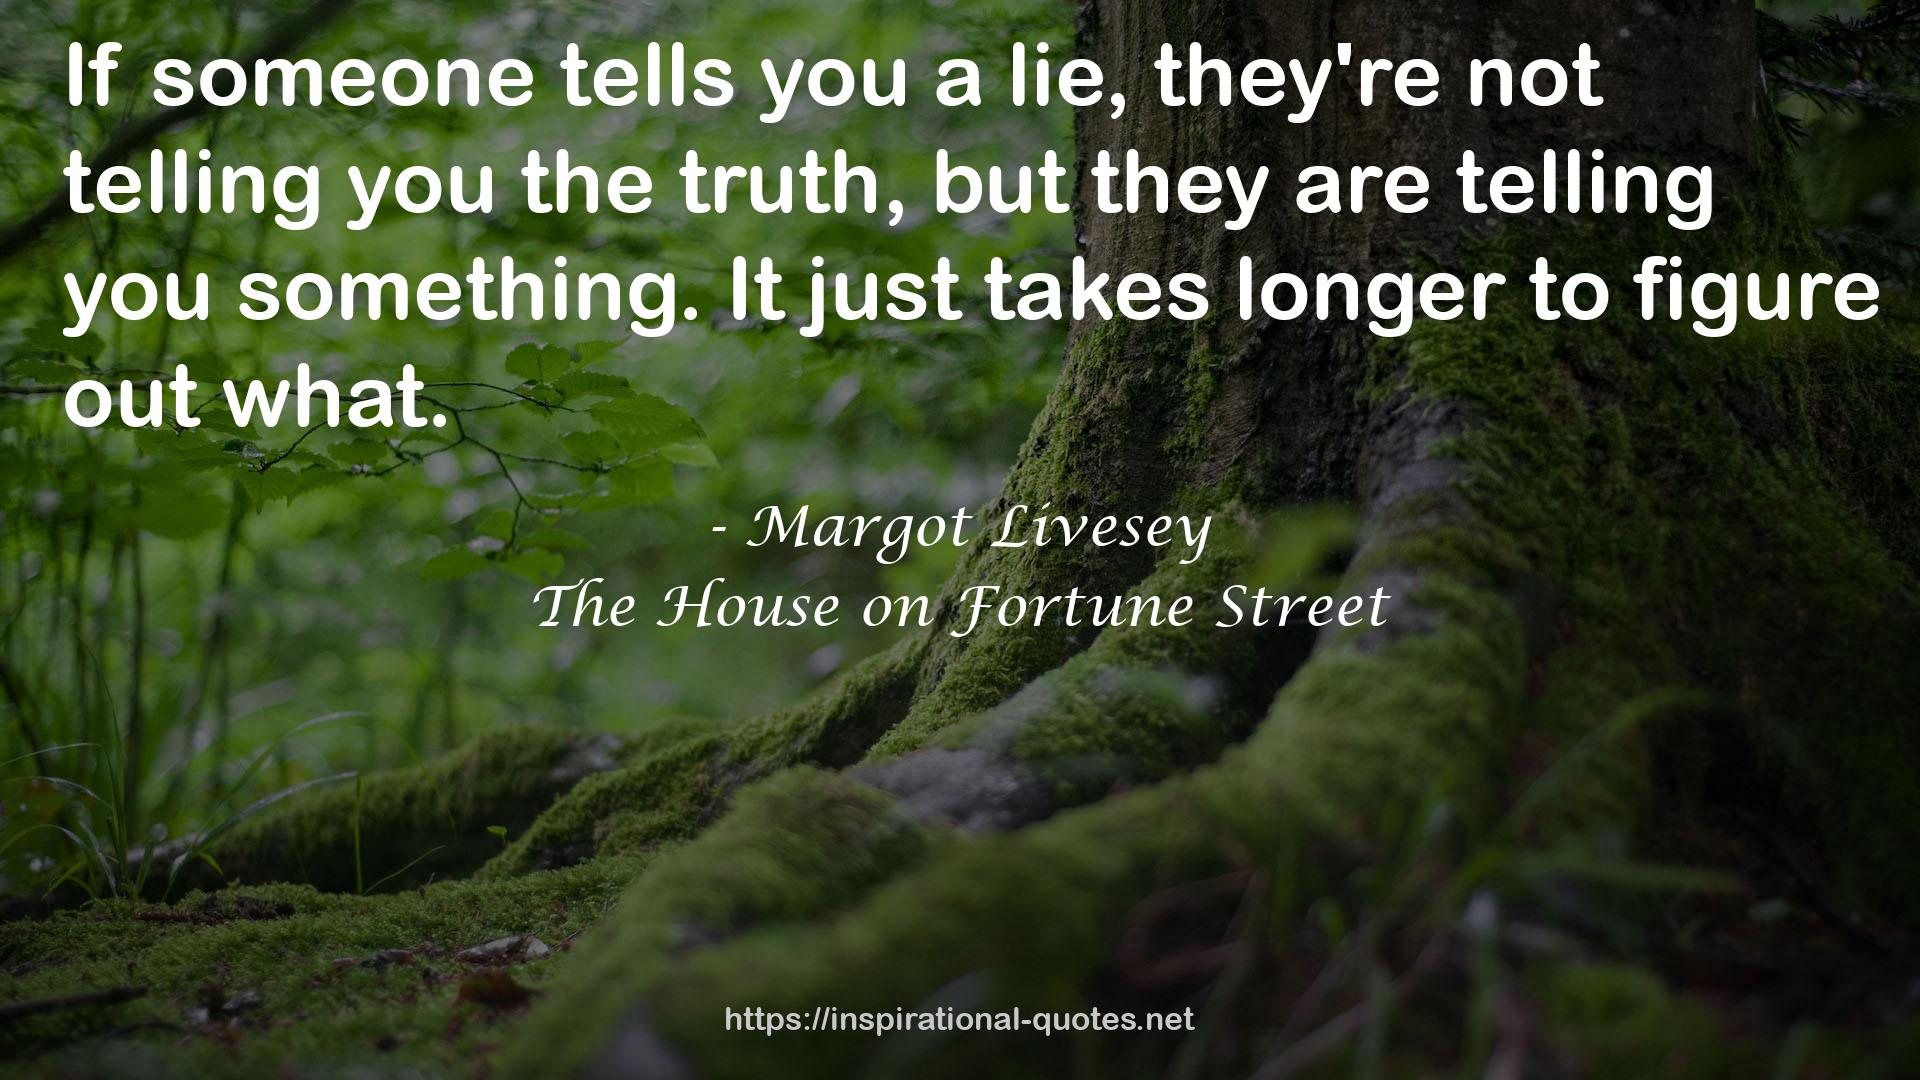 Margot Livesey QUOTES